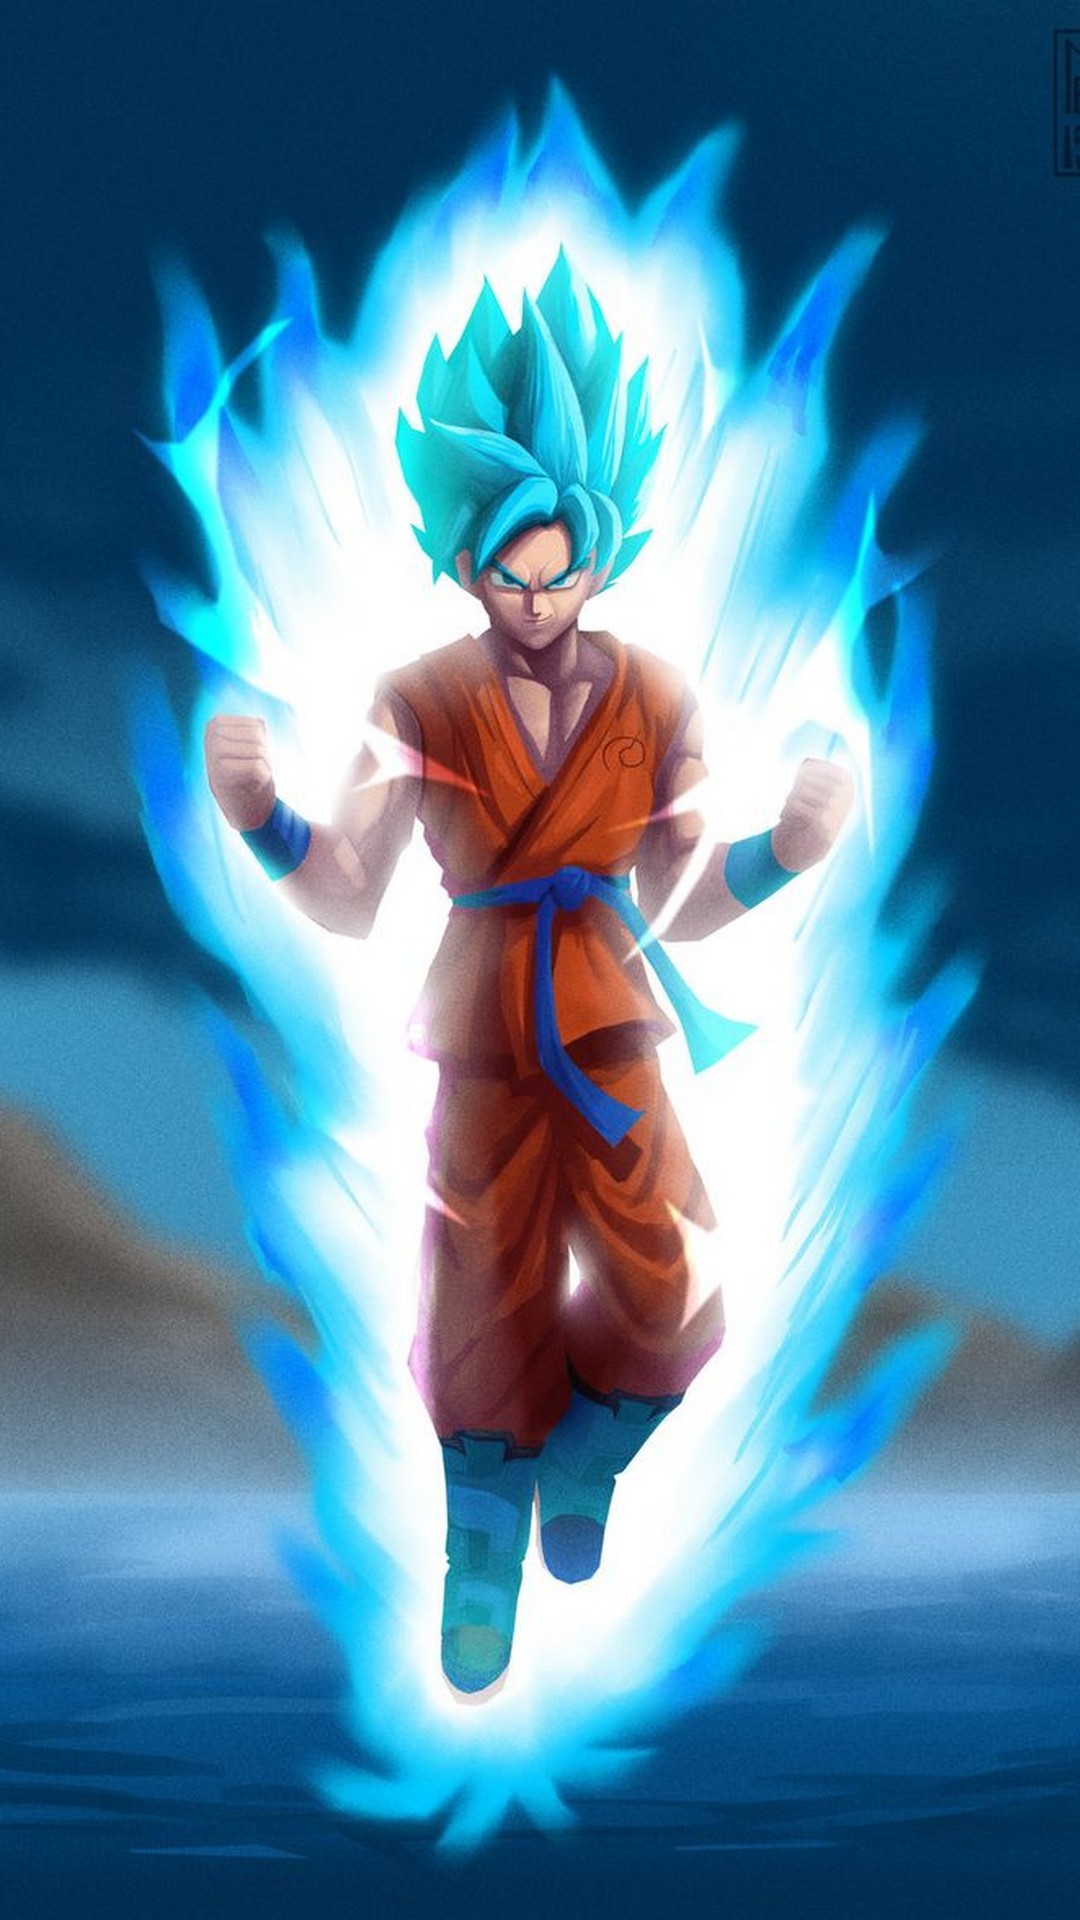 Goku SSJ Blue iPhone Wallpaper with image resolution 1080x1920 pixel. You can make this wallpaper for your iPhone 5, 6, 7, 8, X backgrounds, Mobile Screensaver, or iPad Lock Screen